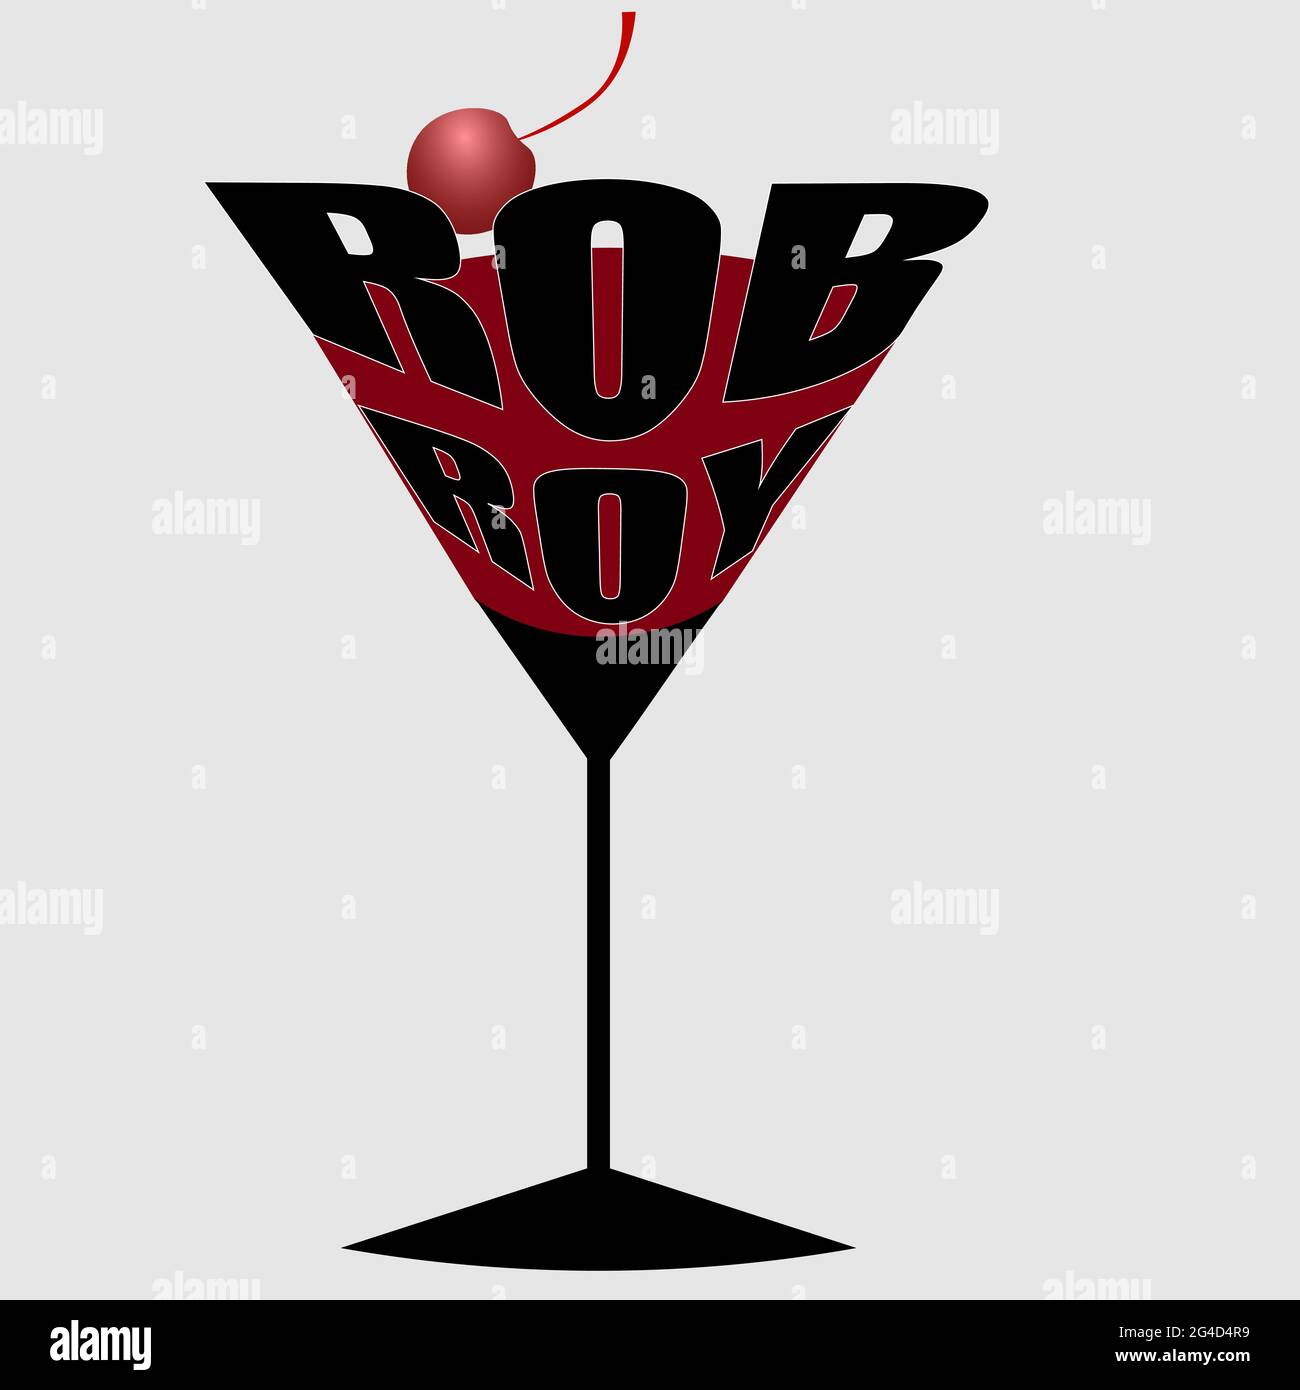 minimalistic lettering of Rob Roy cocktail logo on light background 2 Stock Vector